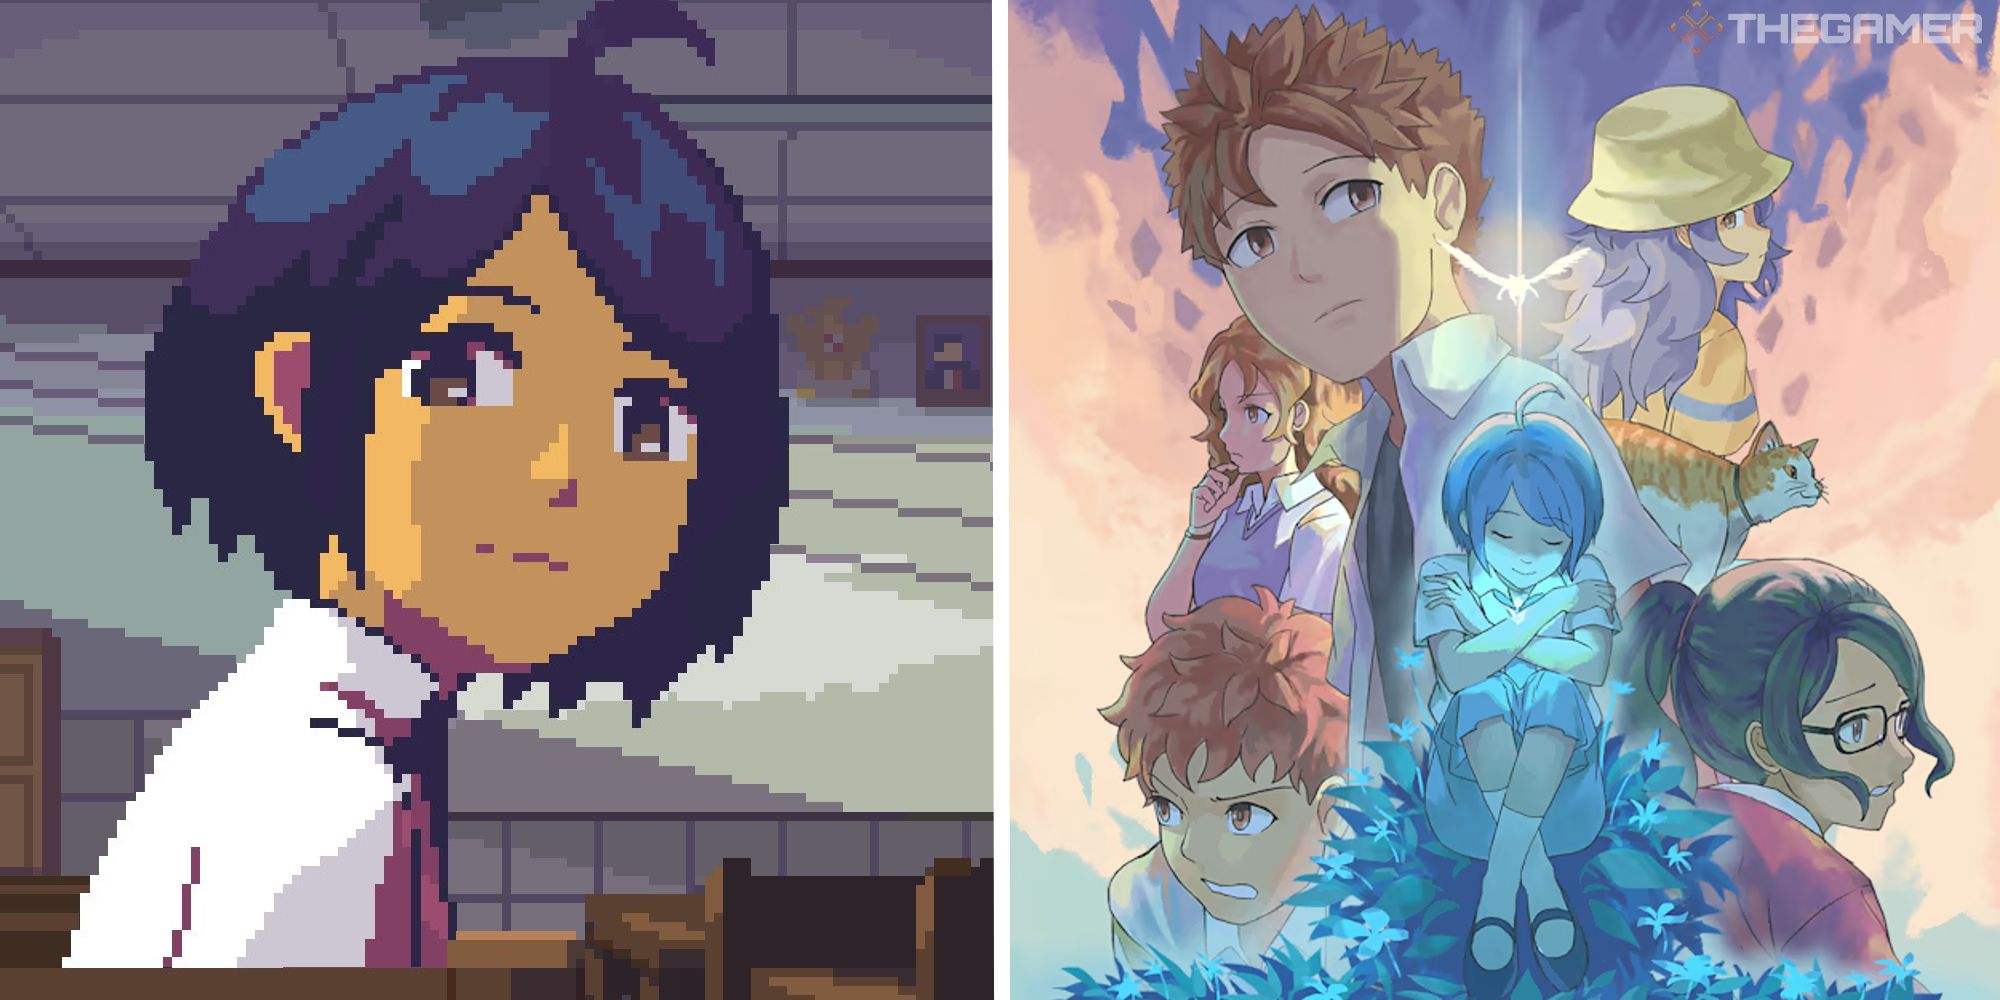 image of raya in class next to image of promotional art for a space for the unbound 